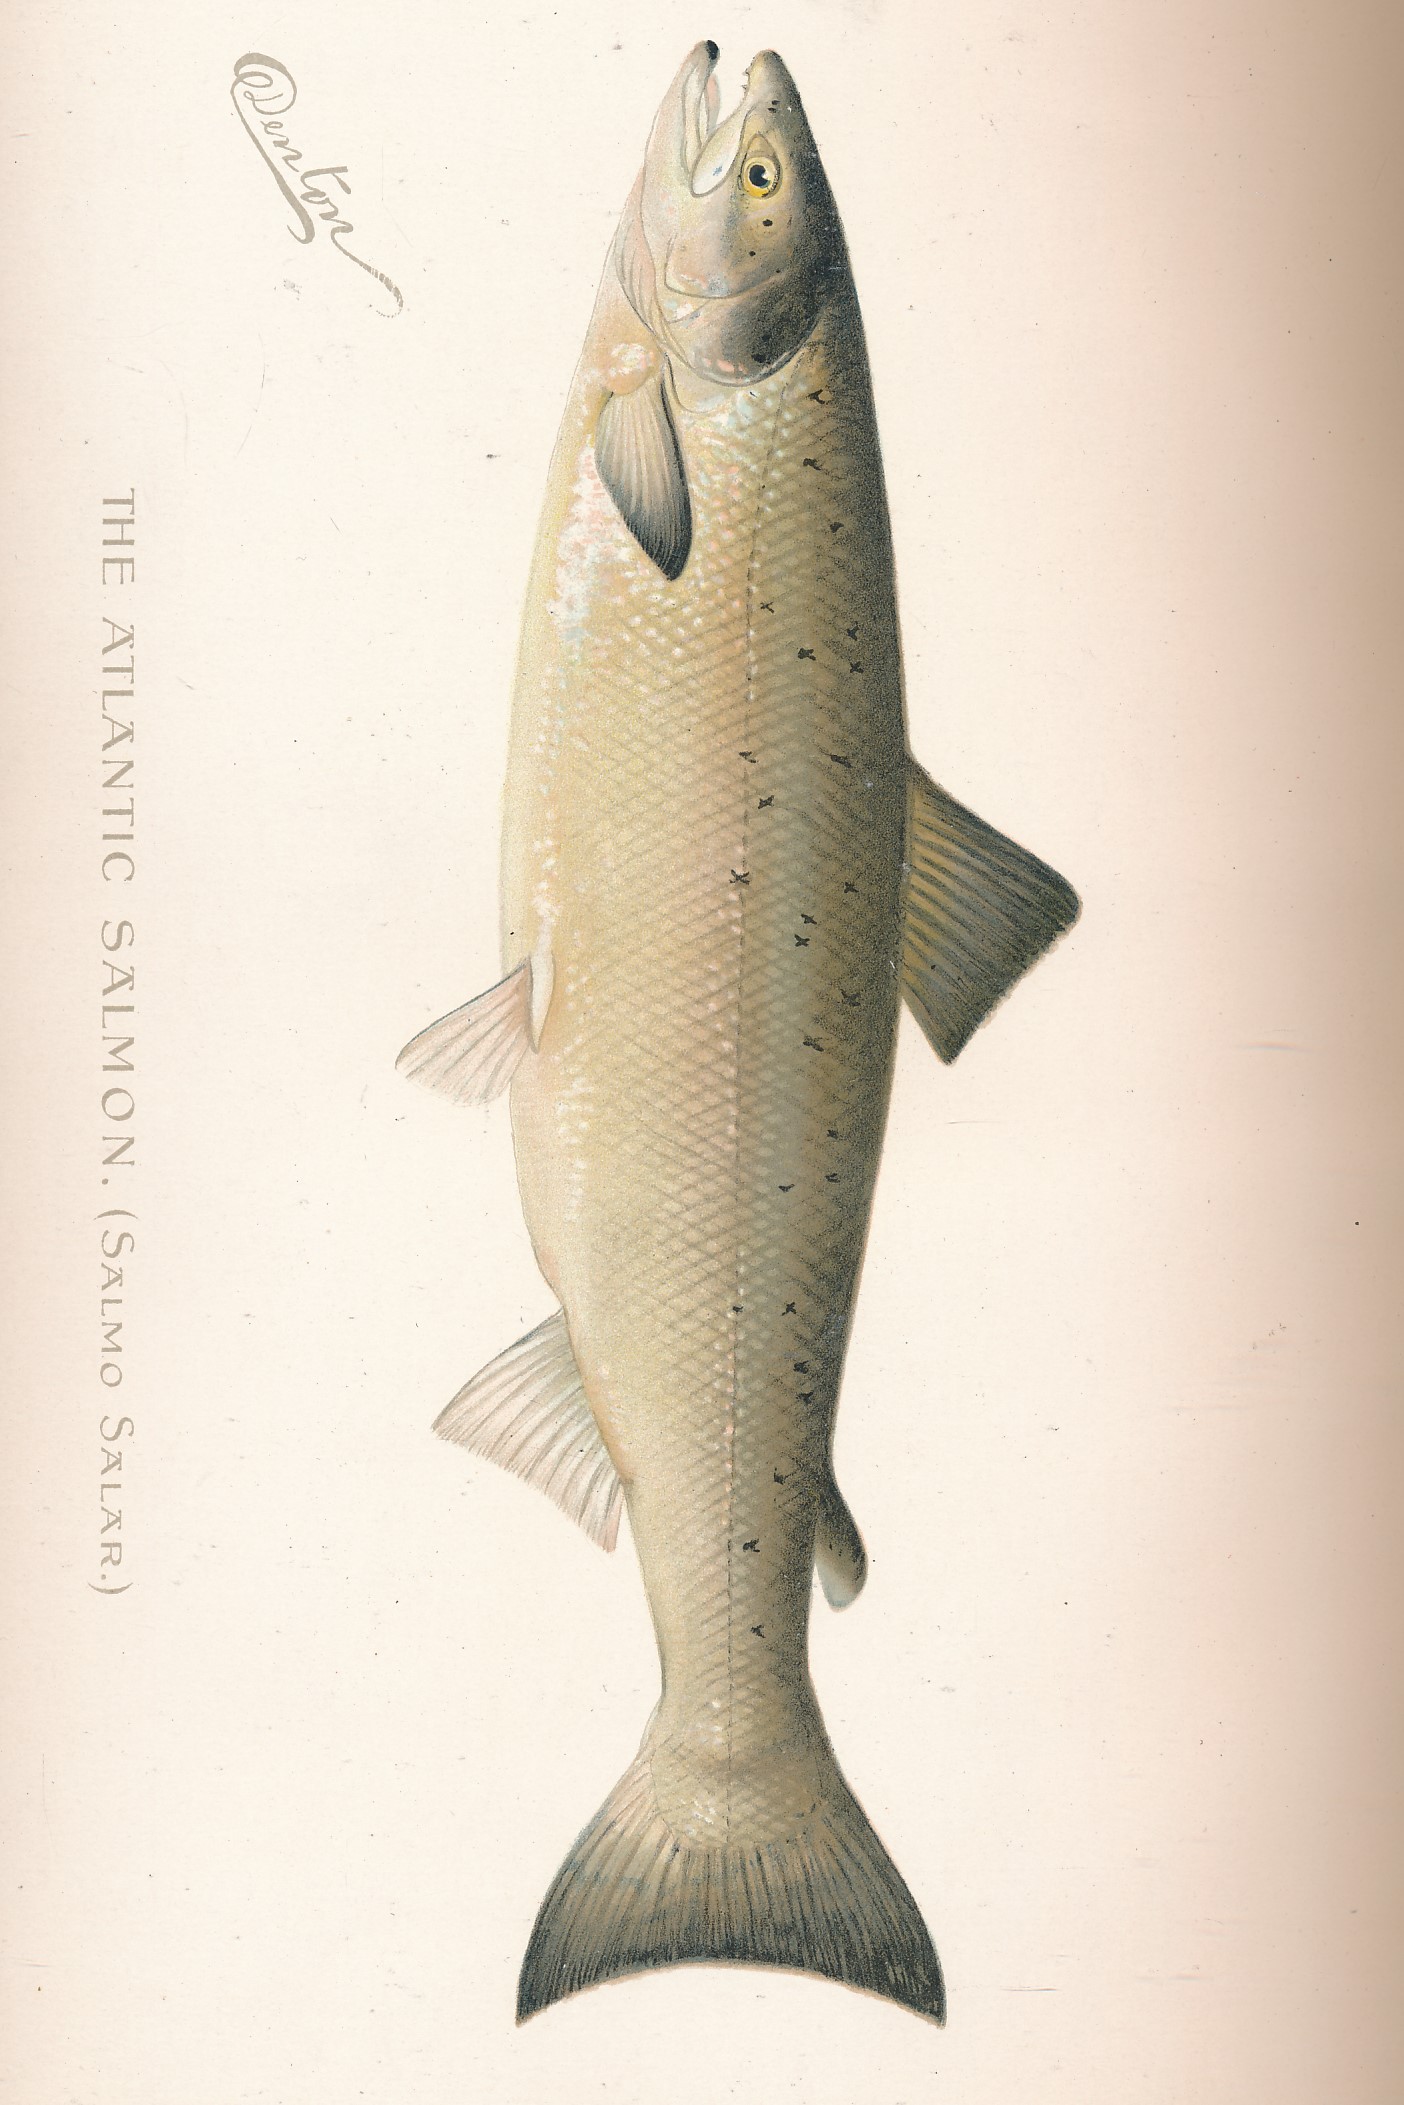 First Annual Report of the Commissioners of Fisheries, Game and Forests. Report for 1895